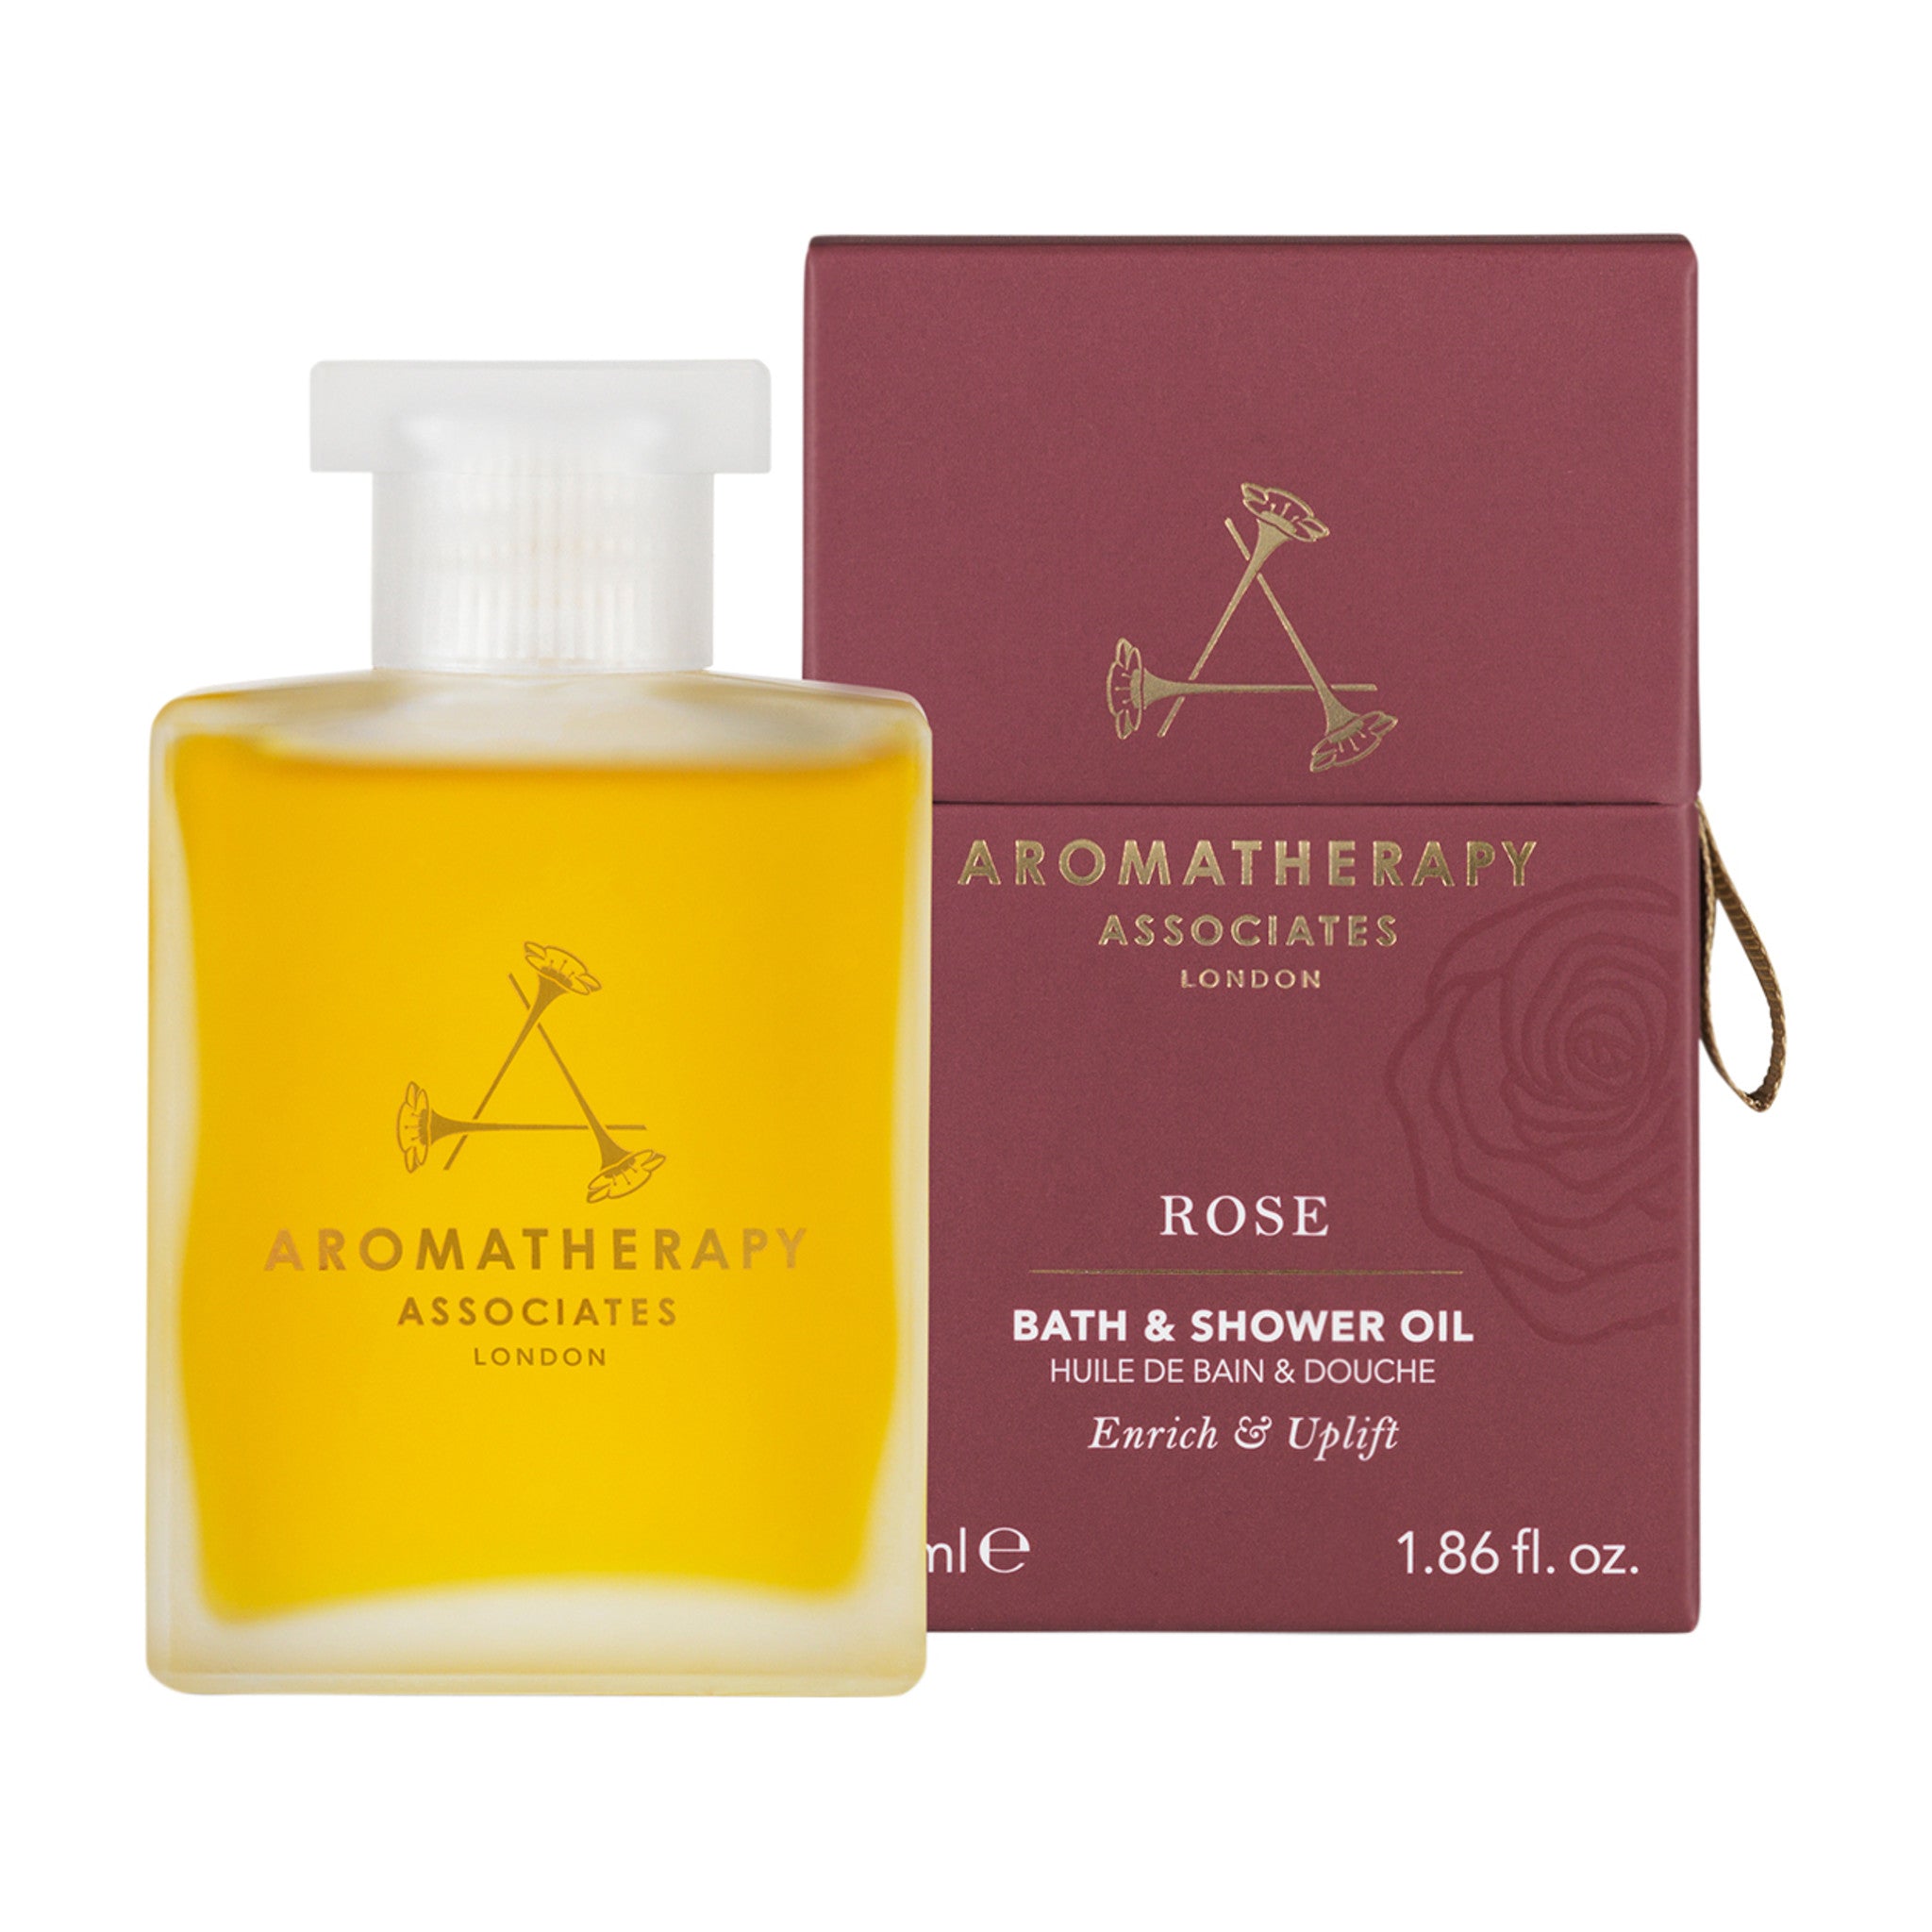 Aromatherapy Associates Rose Bath and Shower oil main image.